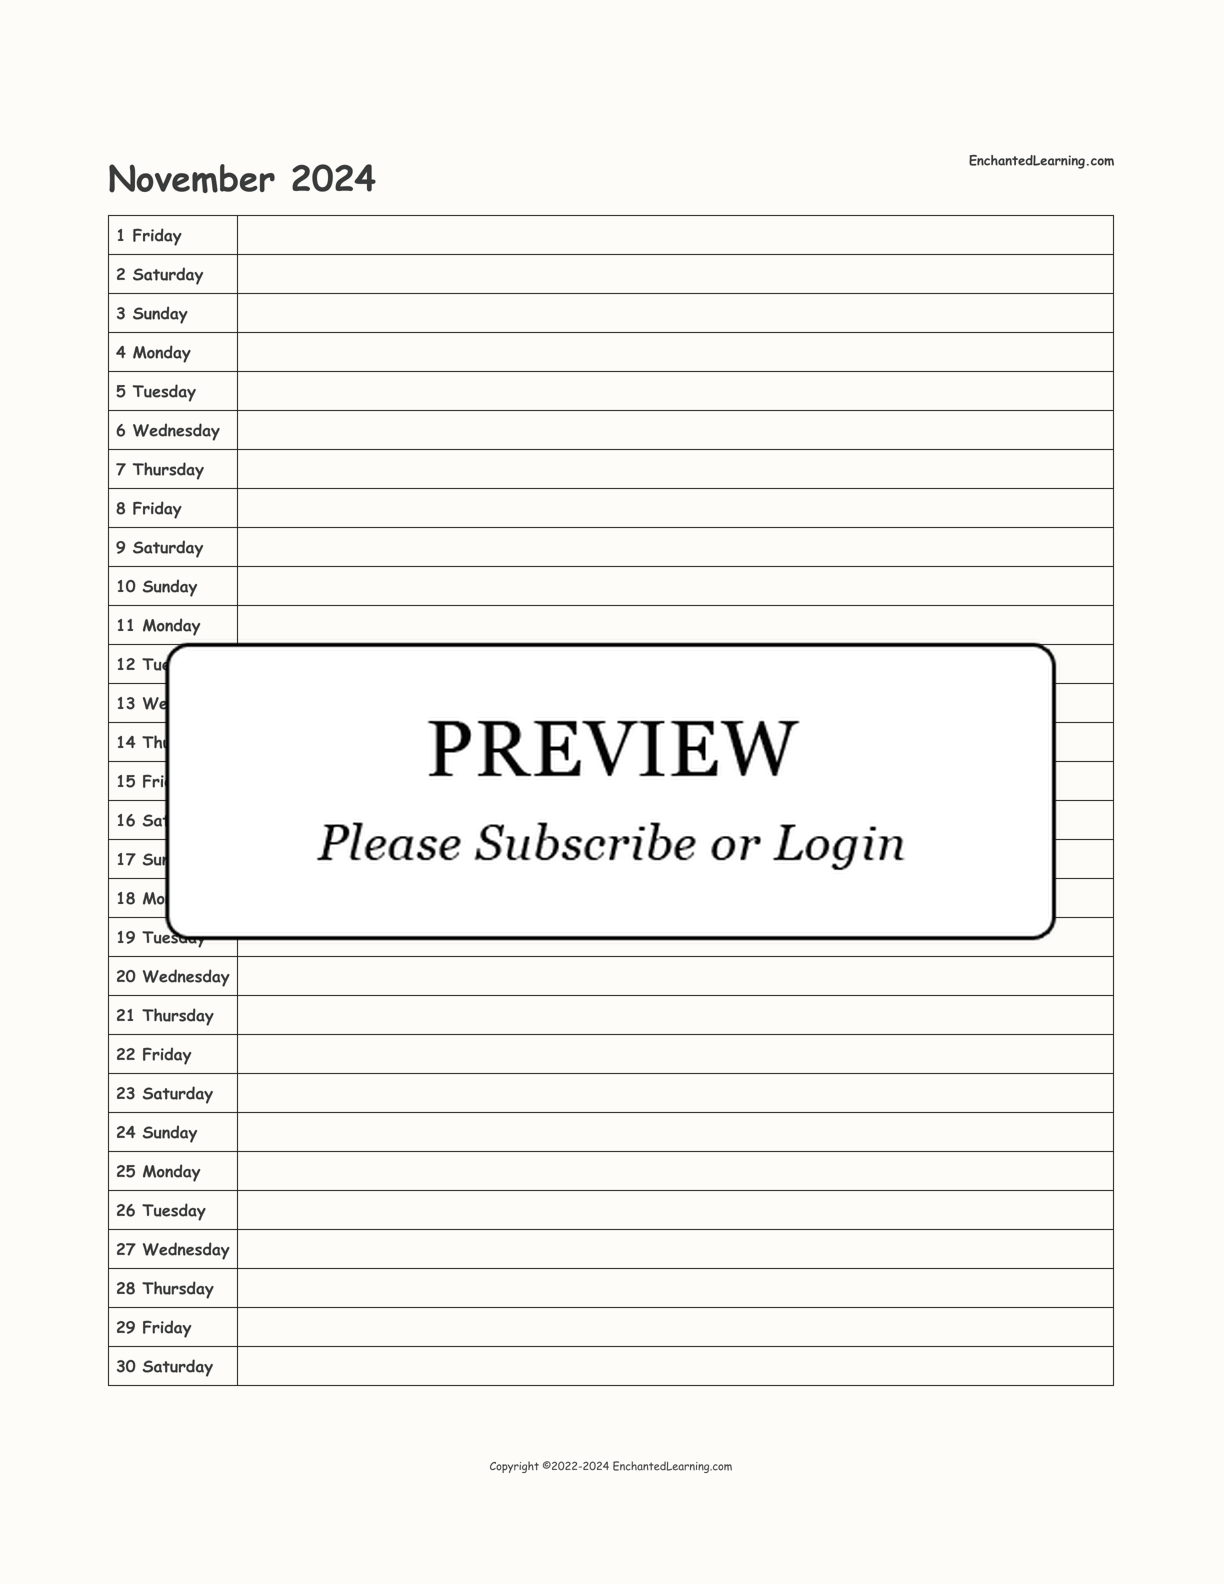 2024 Scheduling Calendar interactive printout page 11